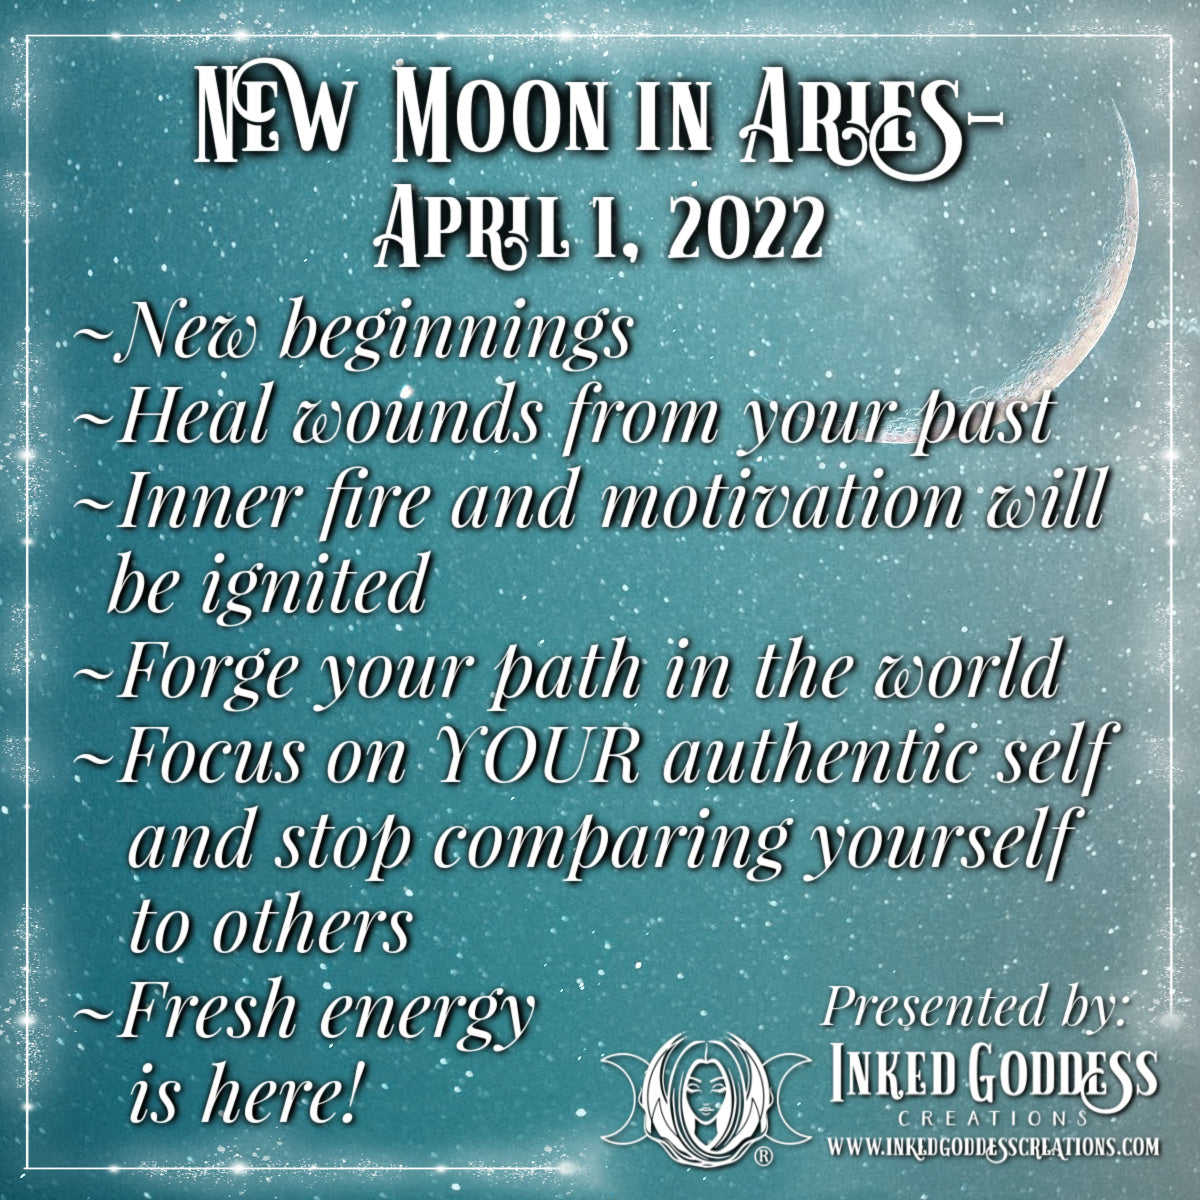 New Moon in Aries- April 1, 2022